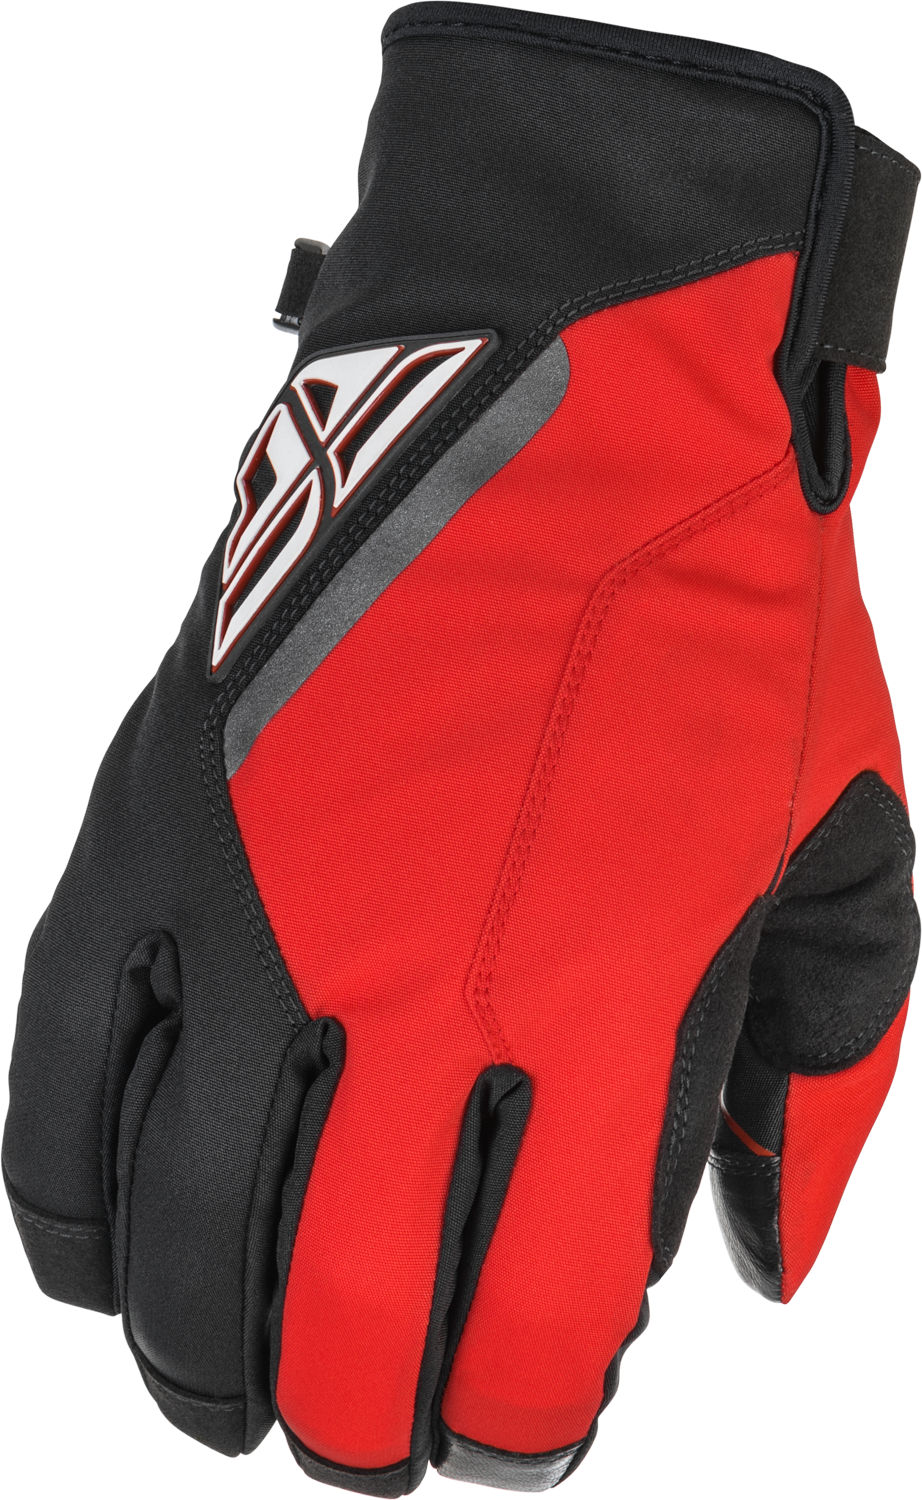 FLY RACING Title Gloves Black/Red Sz 08 371-05308